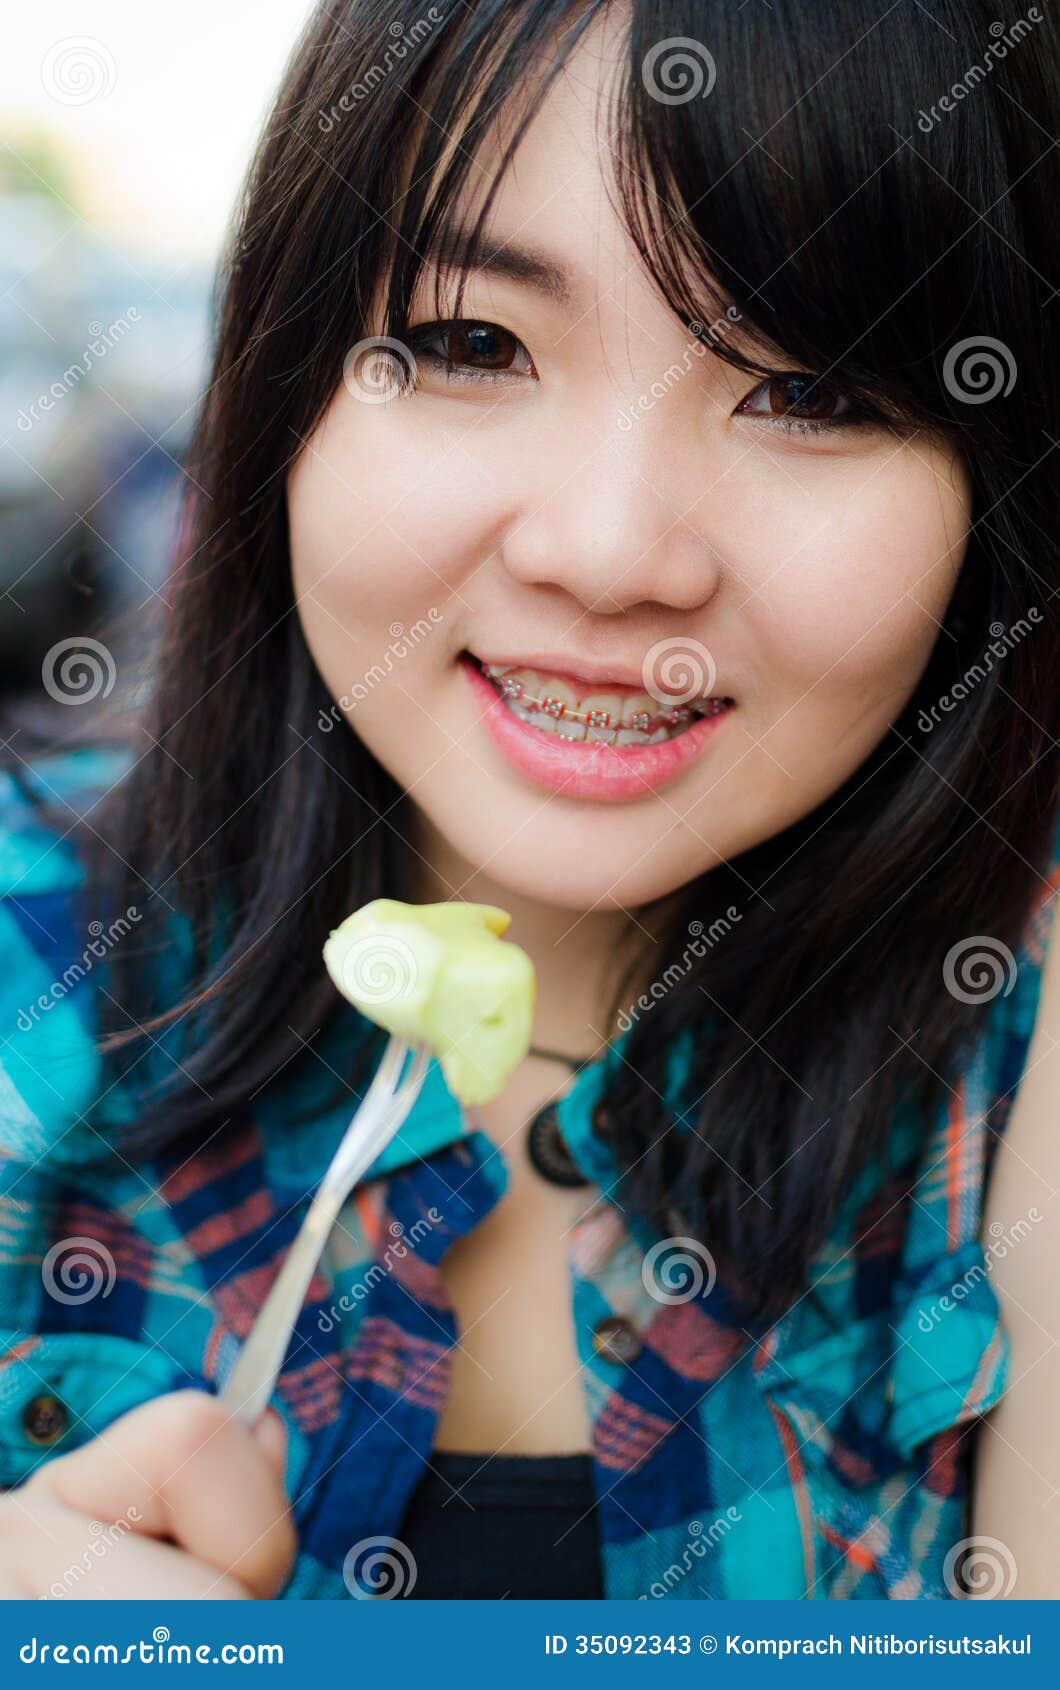 http://thumbs.dreamstime.com/z/thailand-girl-eating-smile-looking-happy-35092343.jpg